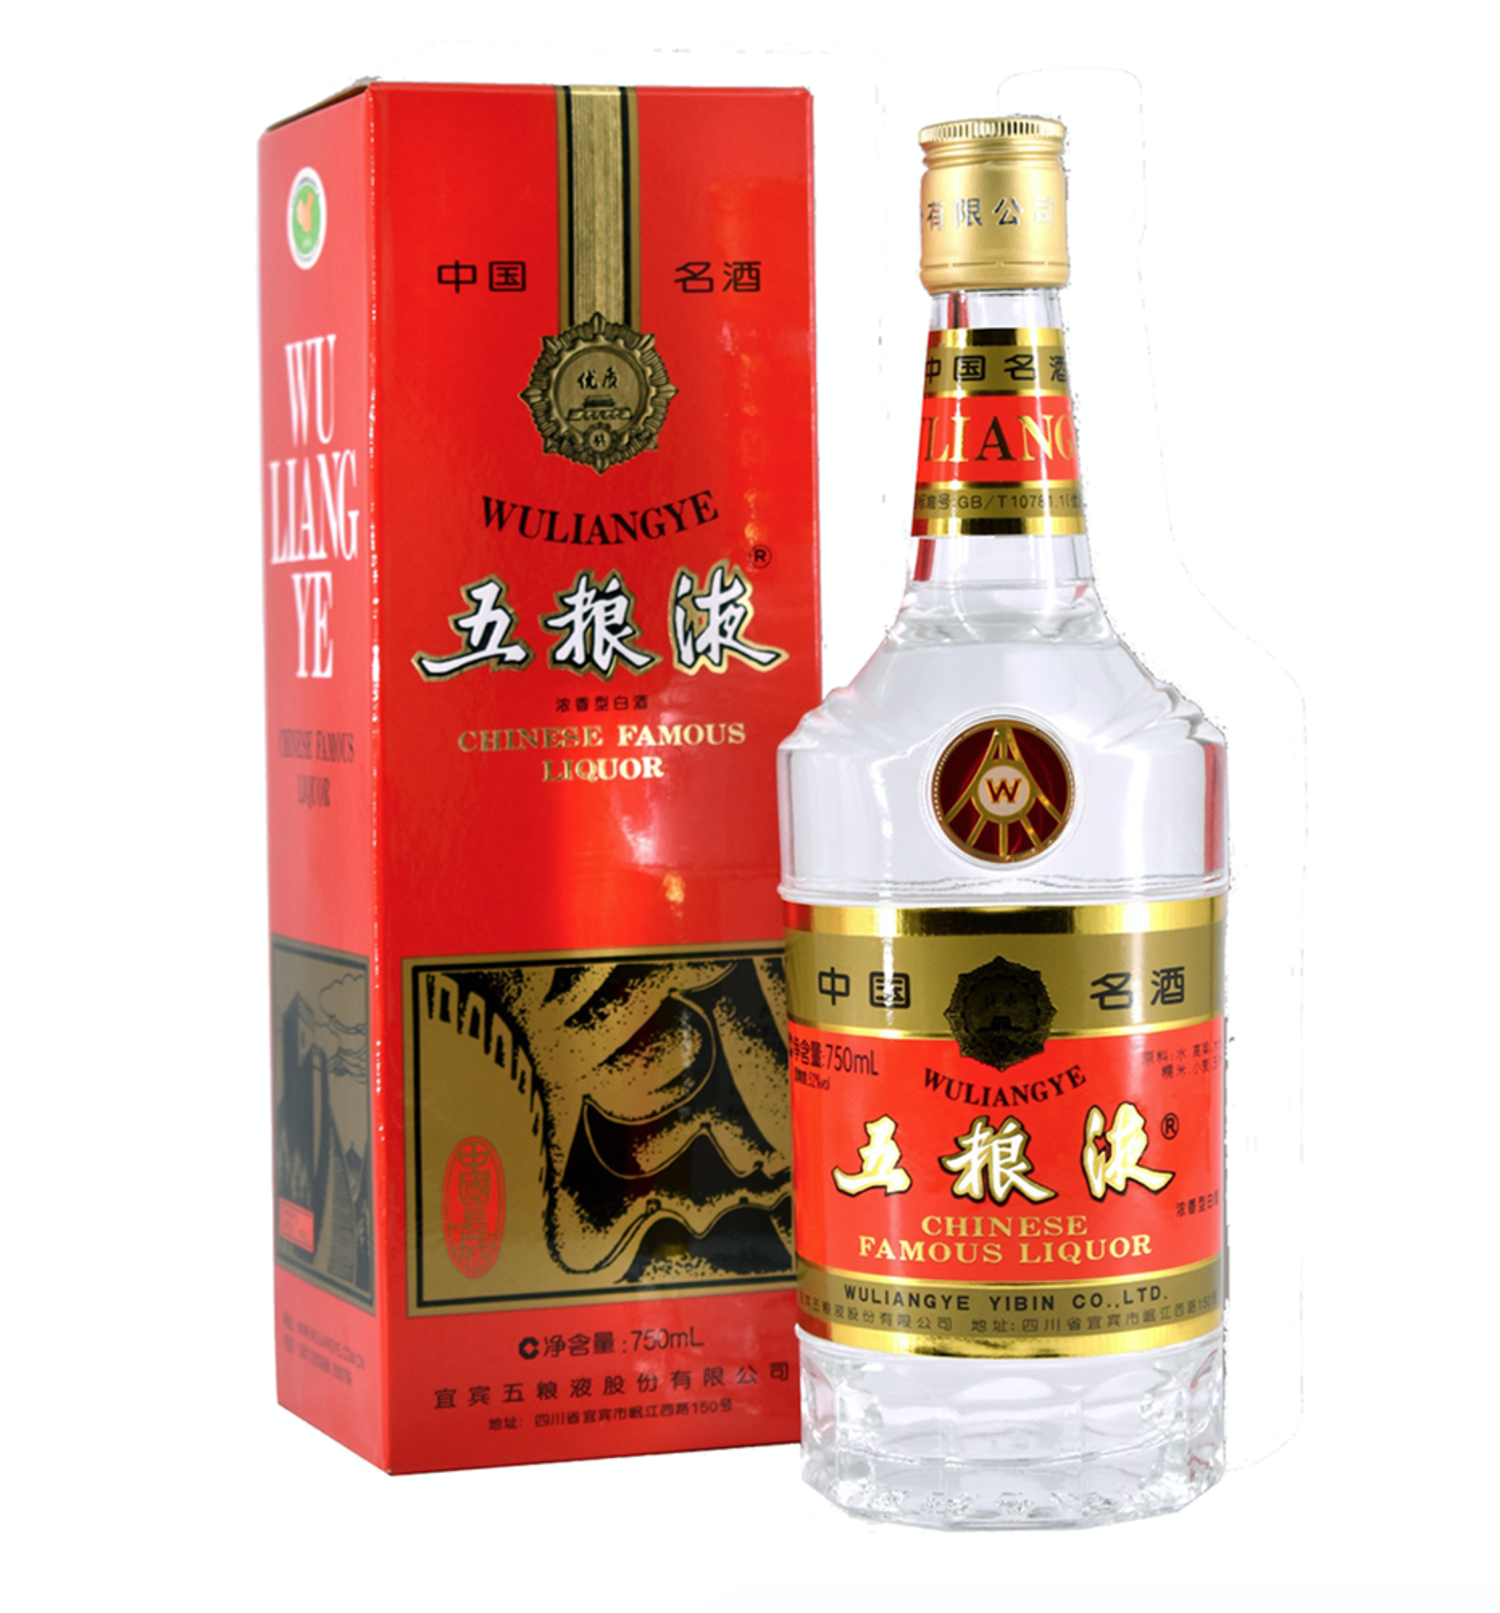 WuLiangYe 五粮液长城装2021 750ml $219 FREE DELIVERY - Uncle Fossil 